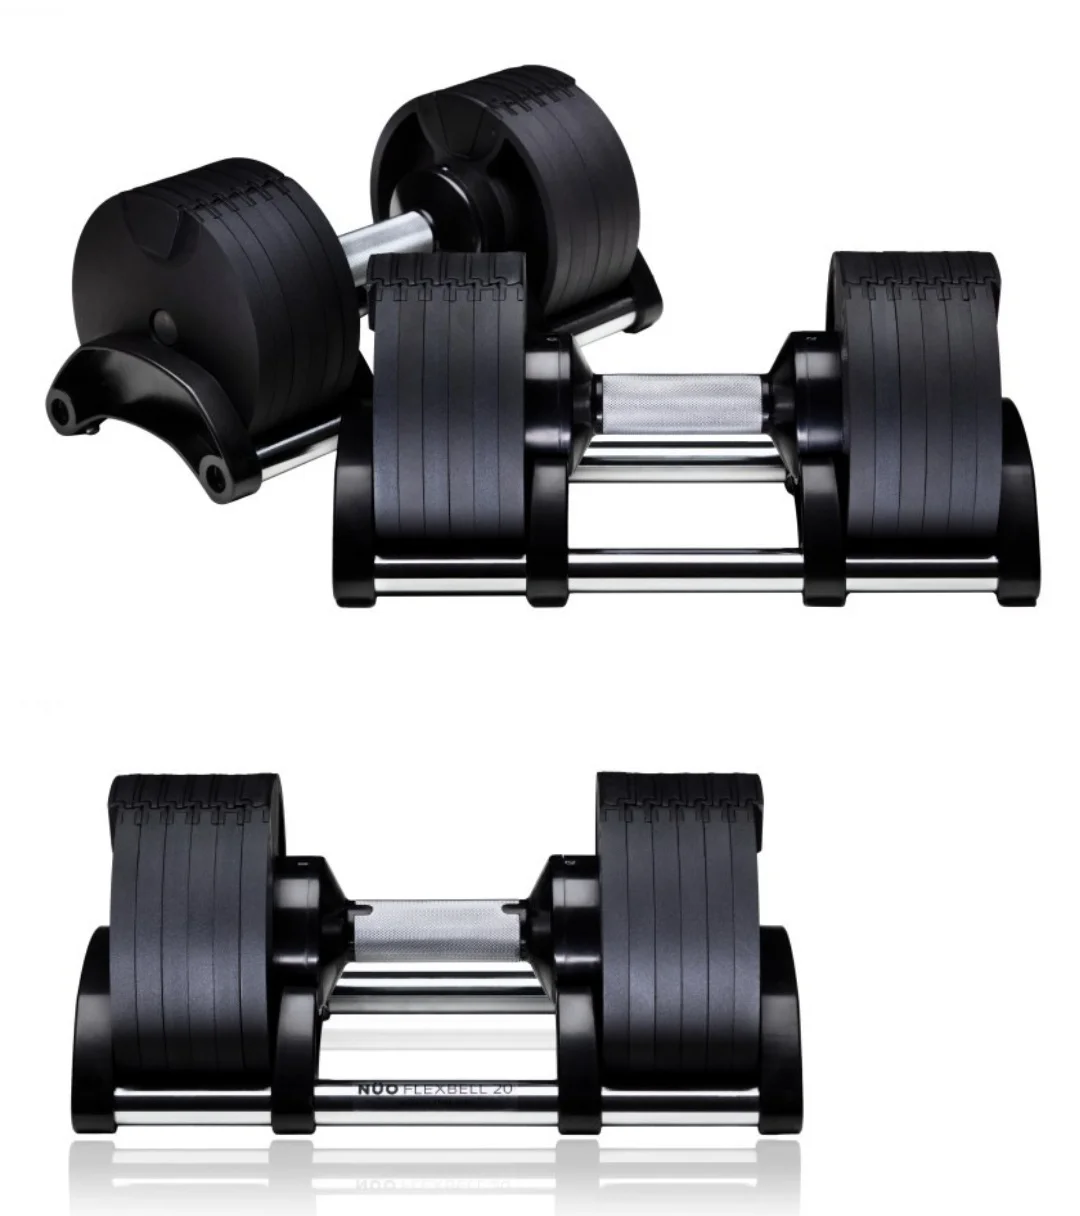 leef ermee opstelling pasta Workout Gym Equipment Dumbbell Set Weight Lifting Training Adjustable Dumbbells  Buy Online - Buy Gym Equipment Dumbbell Set,Fitness Dumbbells,Dumbbell Set  Product on Alibaba.com